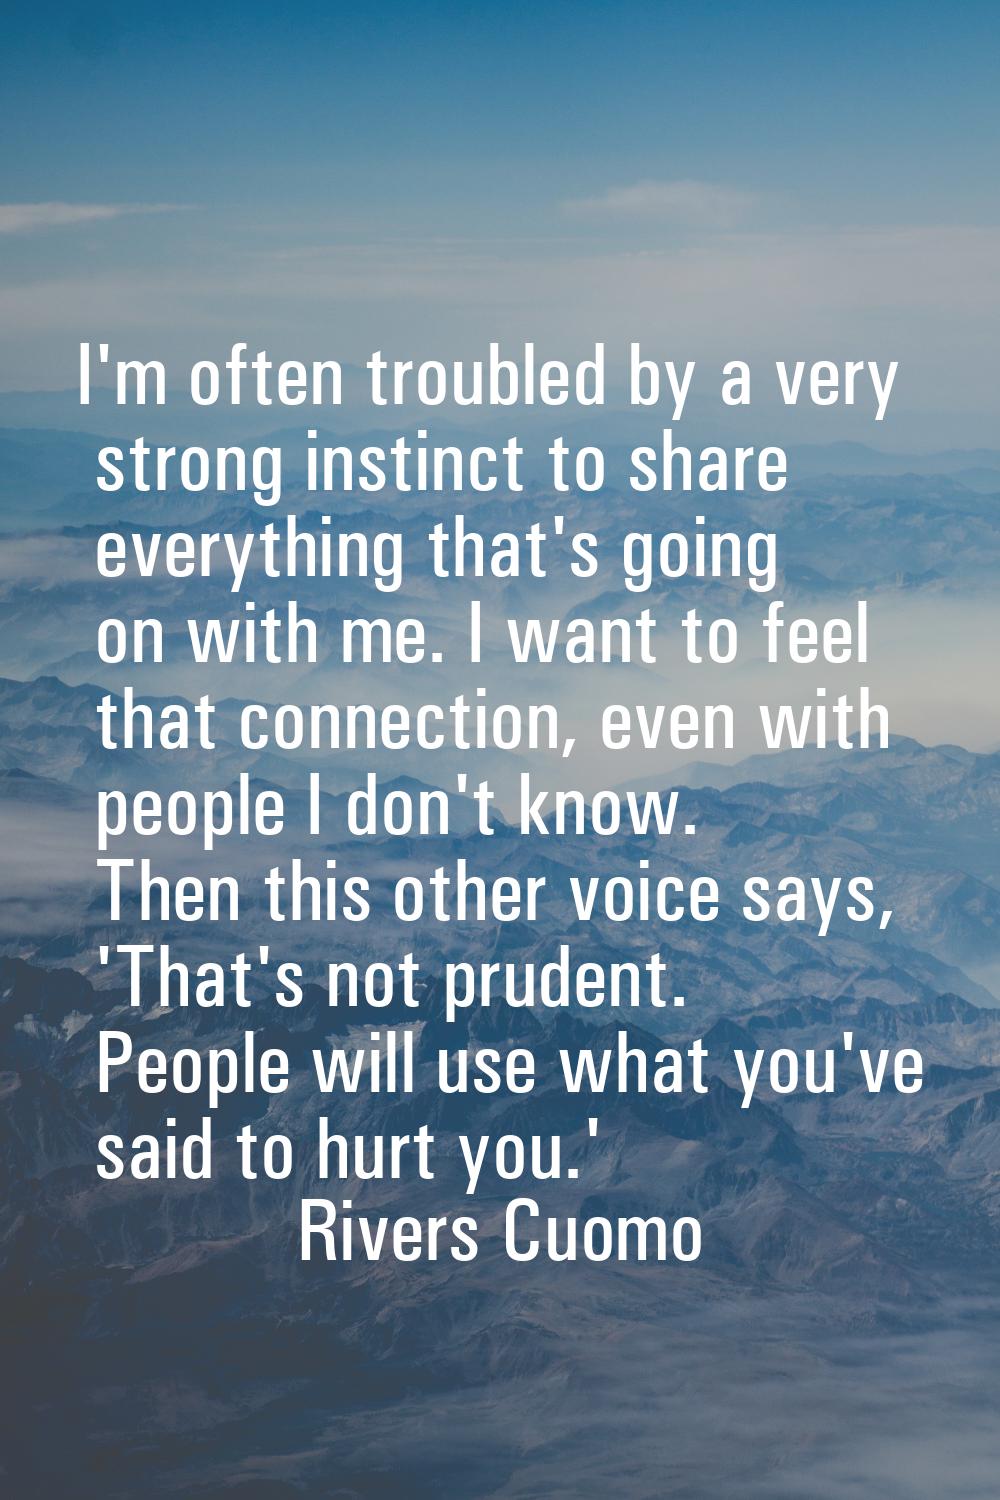 I'm often troubled by a very strong instinct to share everything that's going on with me. I want to